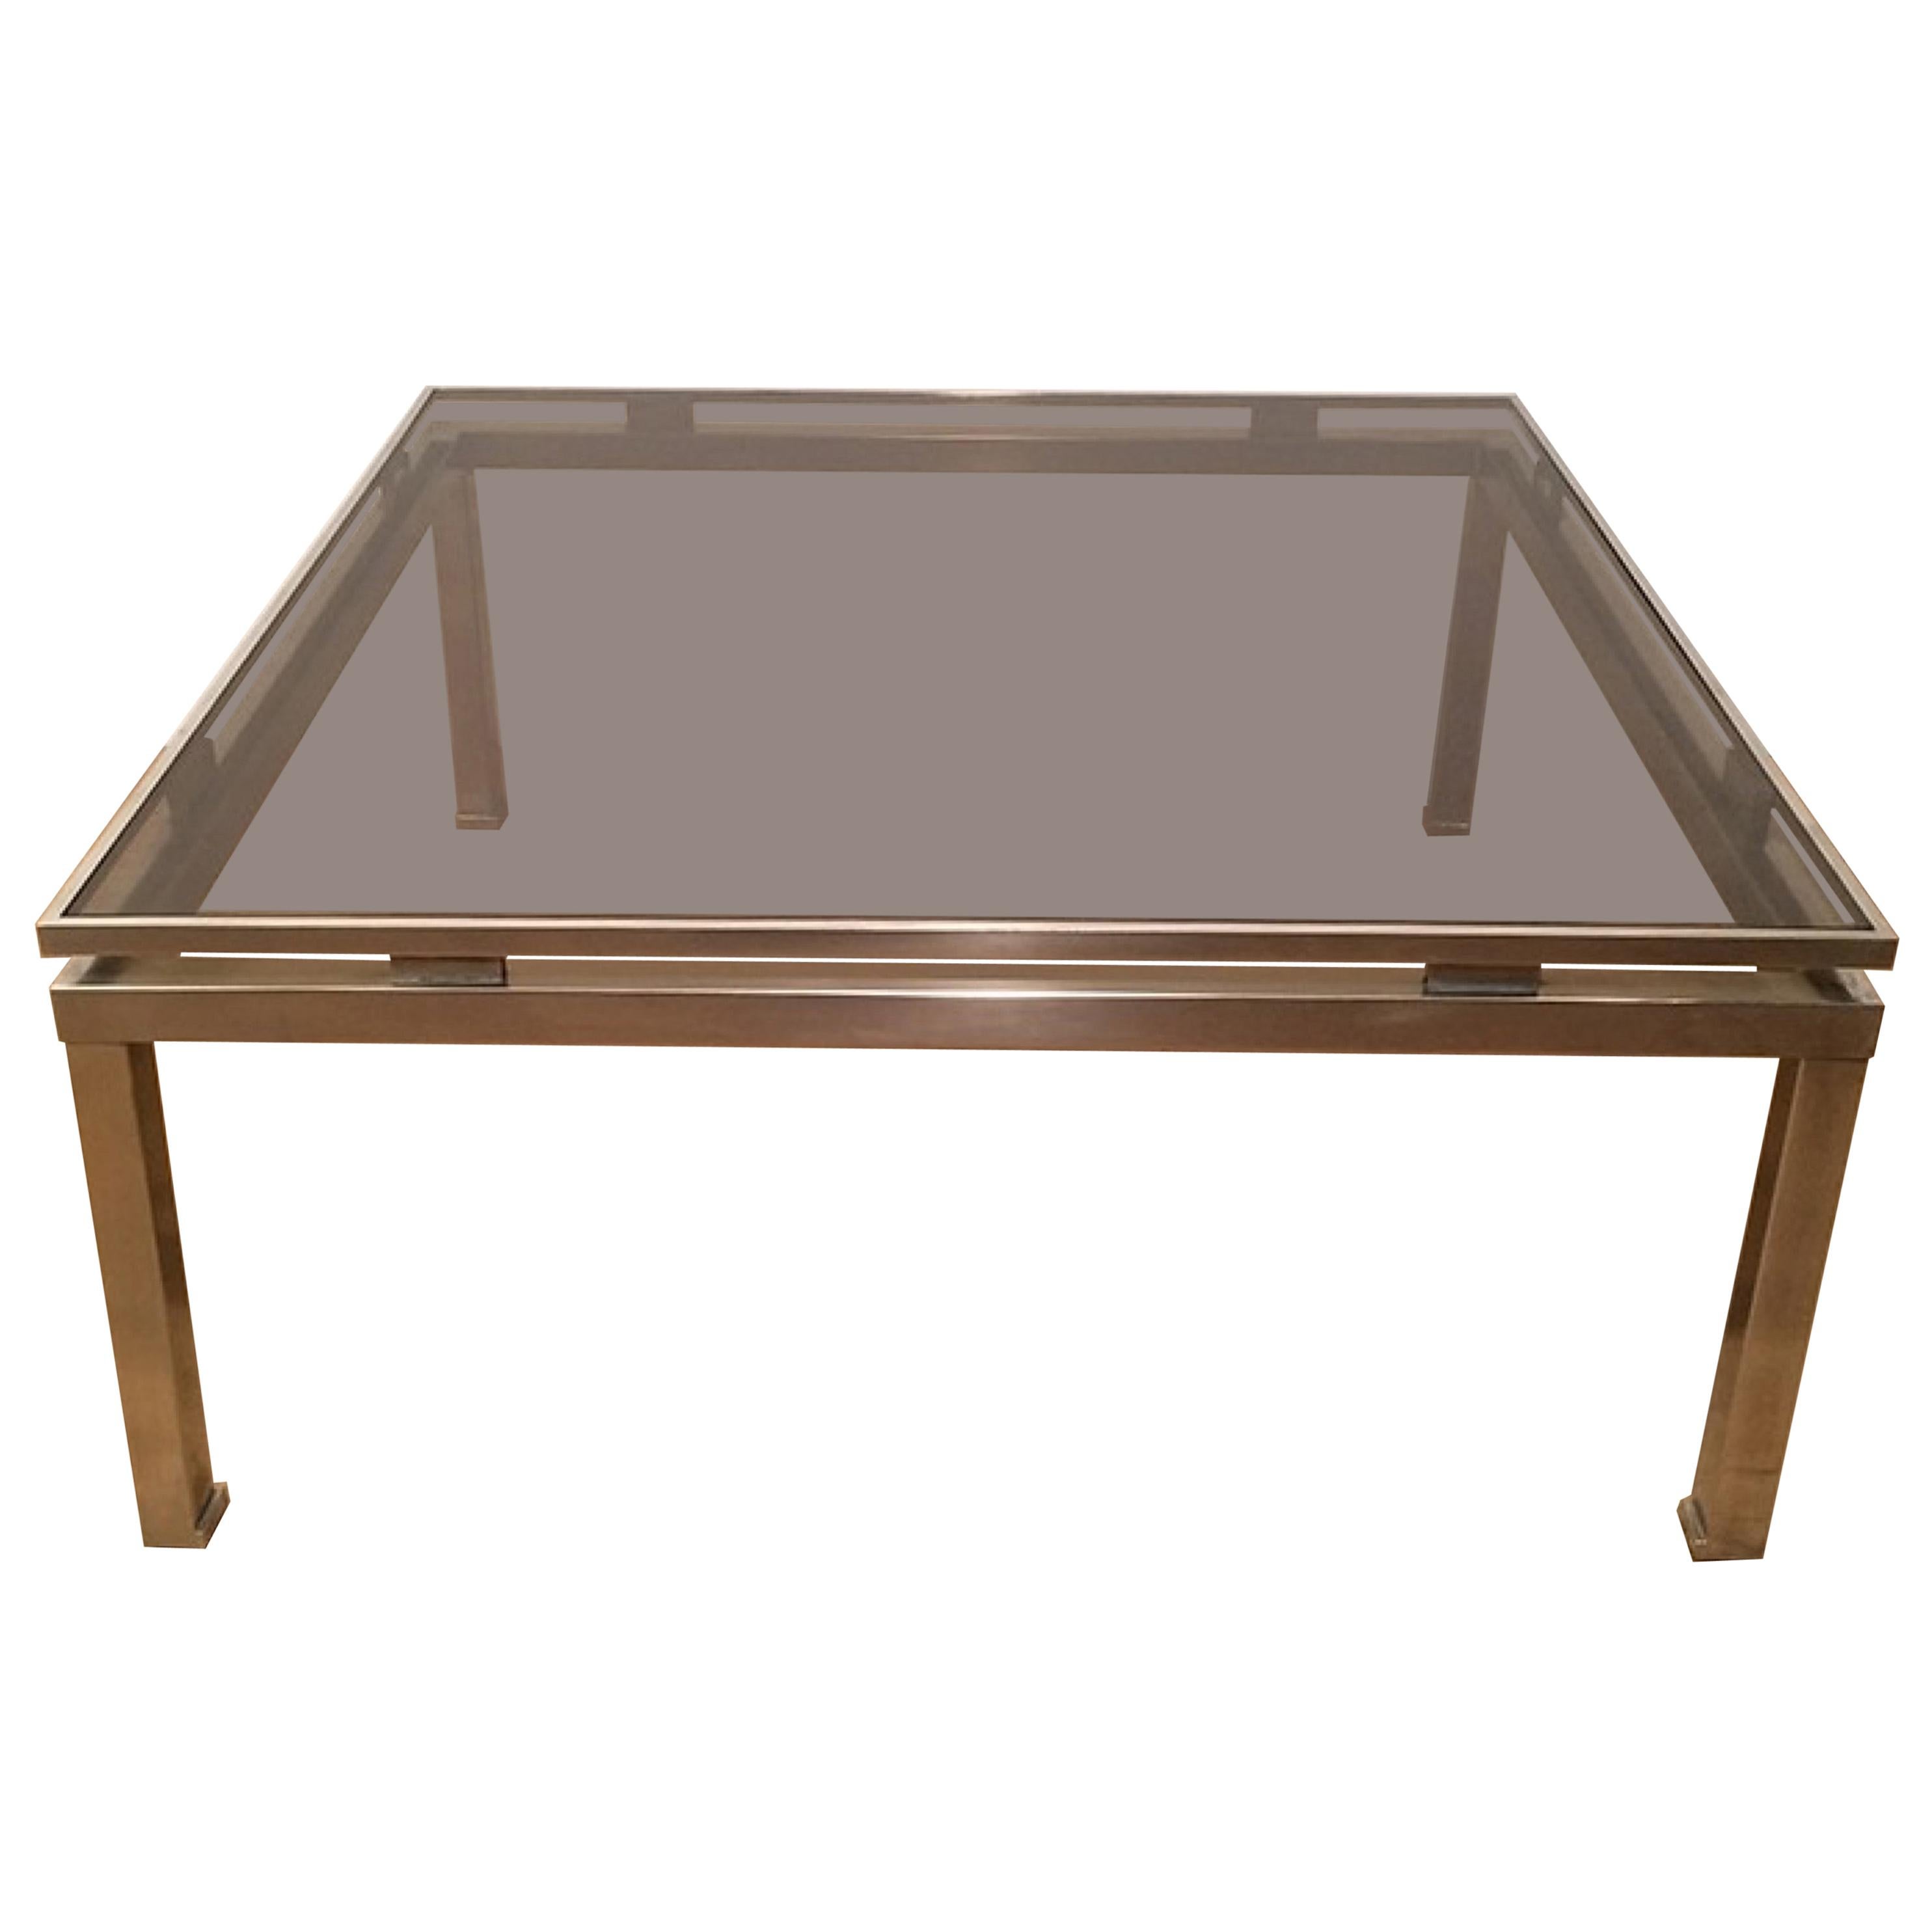 Guy Lefevre, Brushed Steel Square Coffee Table, circa 1970